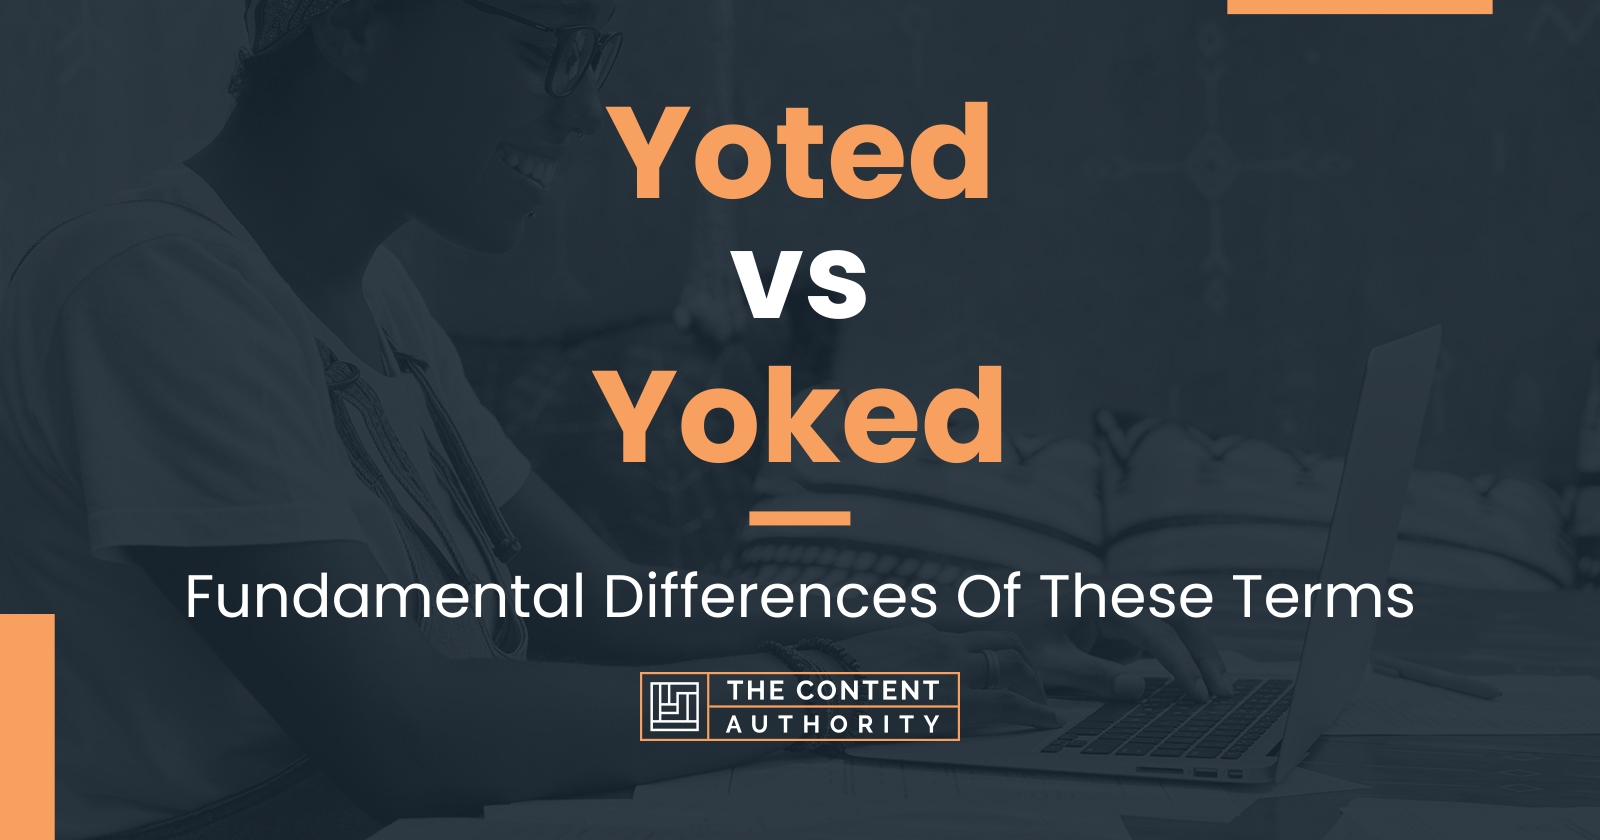 Yoted vs Yoked: Fundamental Differences Of These Terms